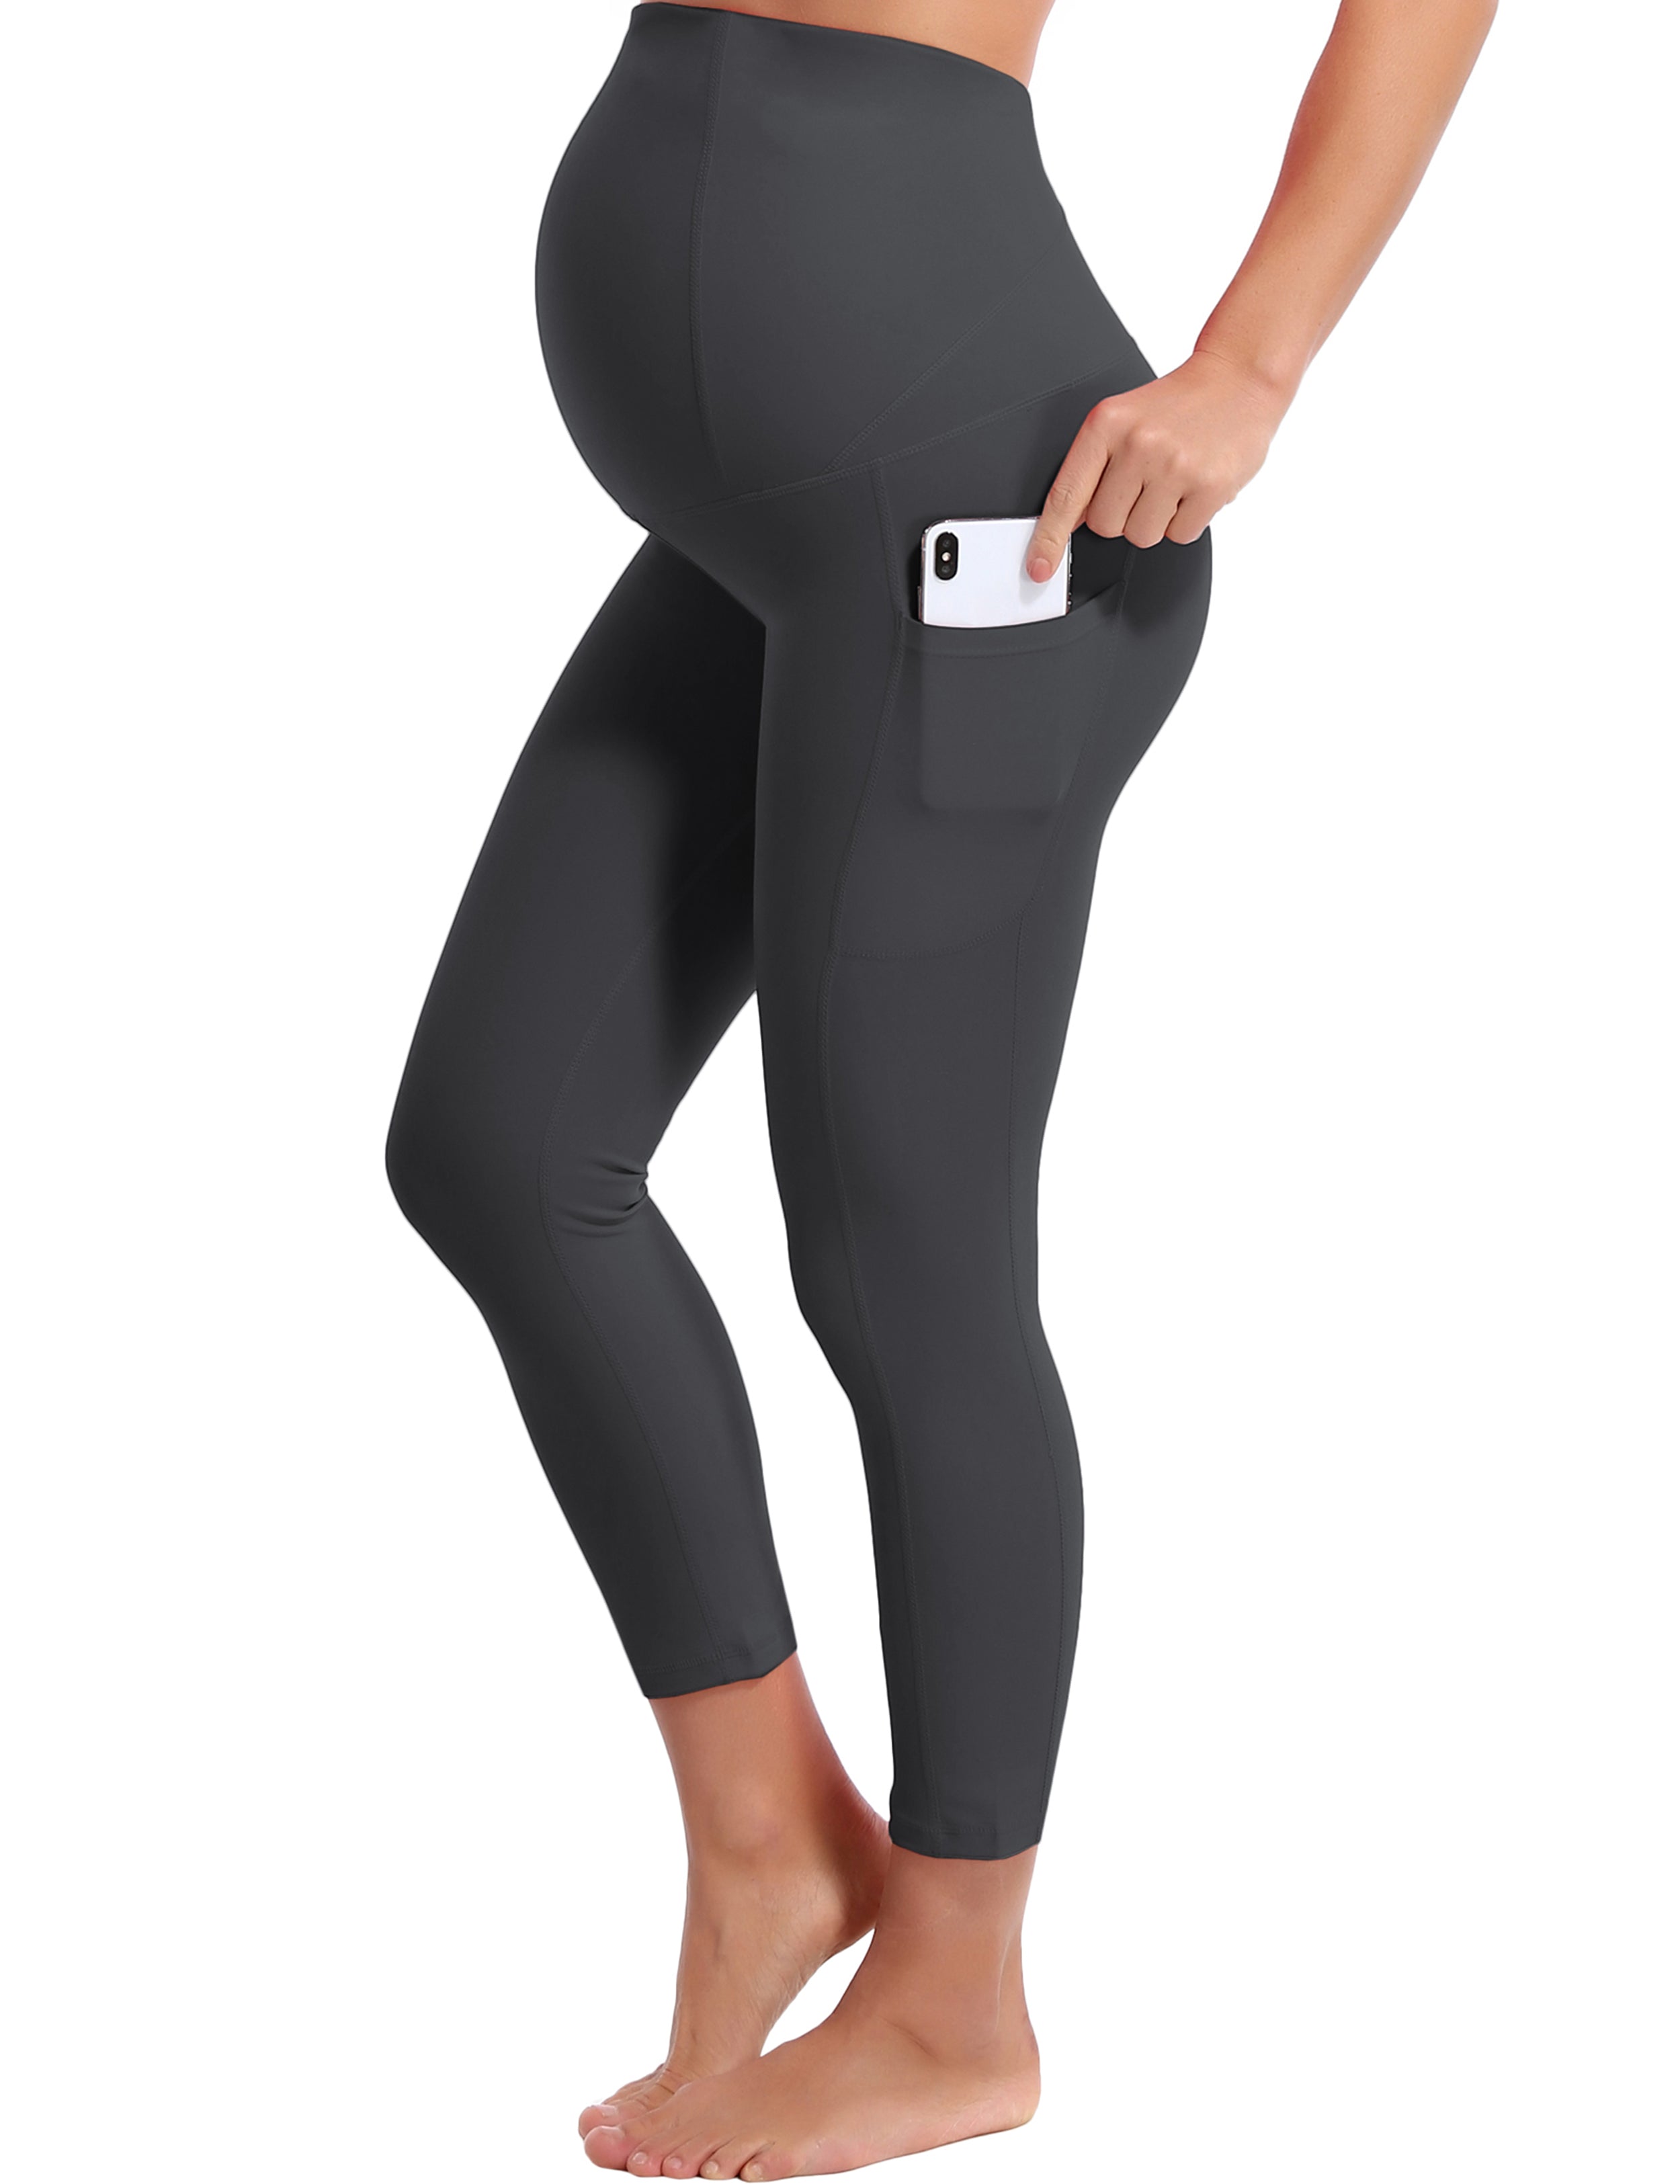 22" Side Pockets Maternity Pilates Pants shadowcharcoal 87%Nylon/13%Spandex Softest-ever fabric High elasticity 4-way stretch Fabric doesn't attract lint easily No see-through Moisture-wicking Machine wash